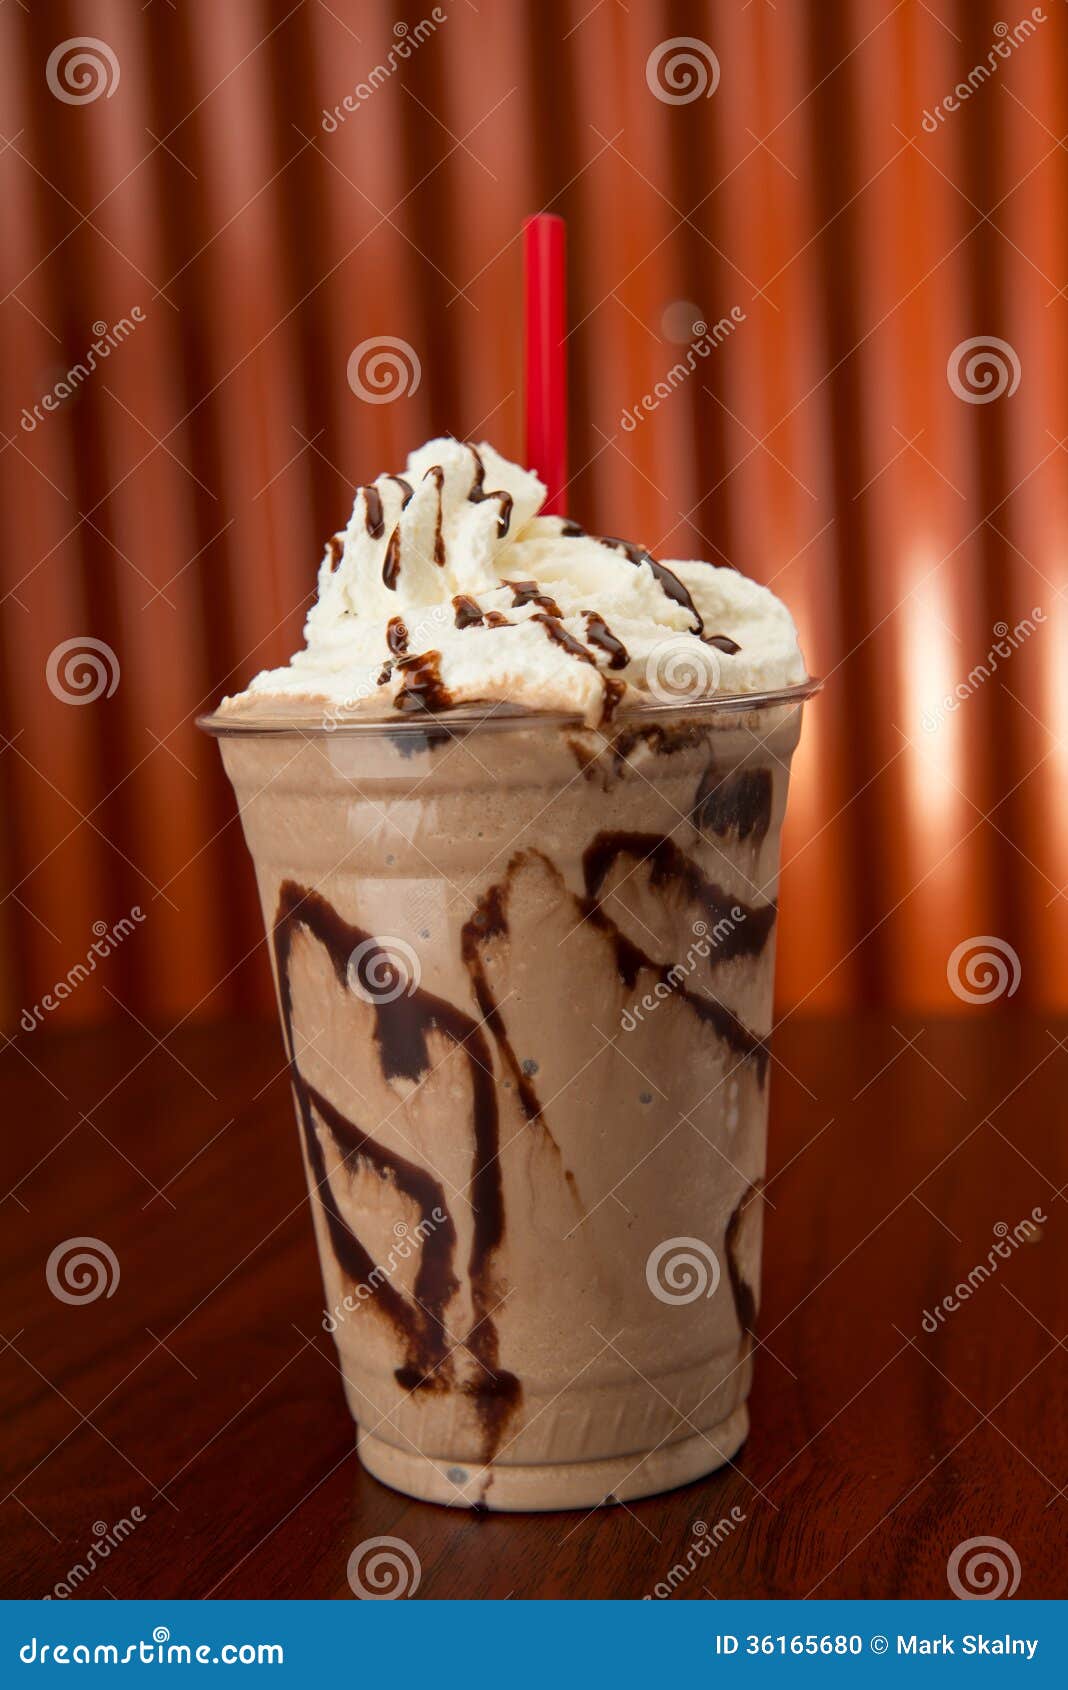 https://thumbs.dreamstime.com/z/chocolate-milkshake-plastic-cup-topped-whipped-cream-red-straw-wood-table-corrugated-copper-wall-36165680.jpg